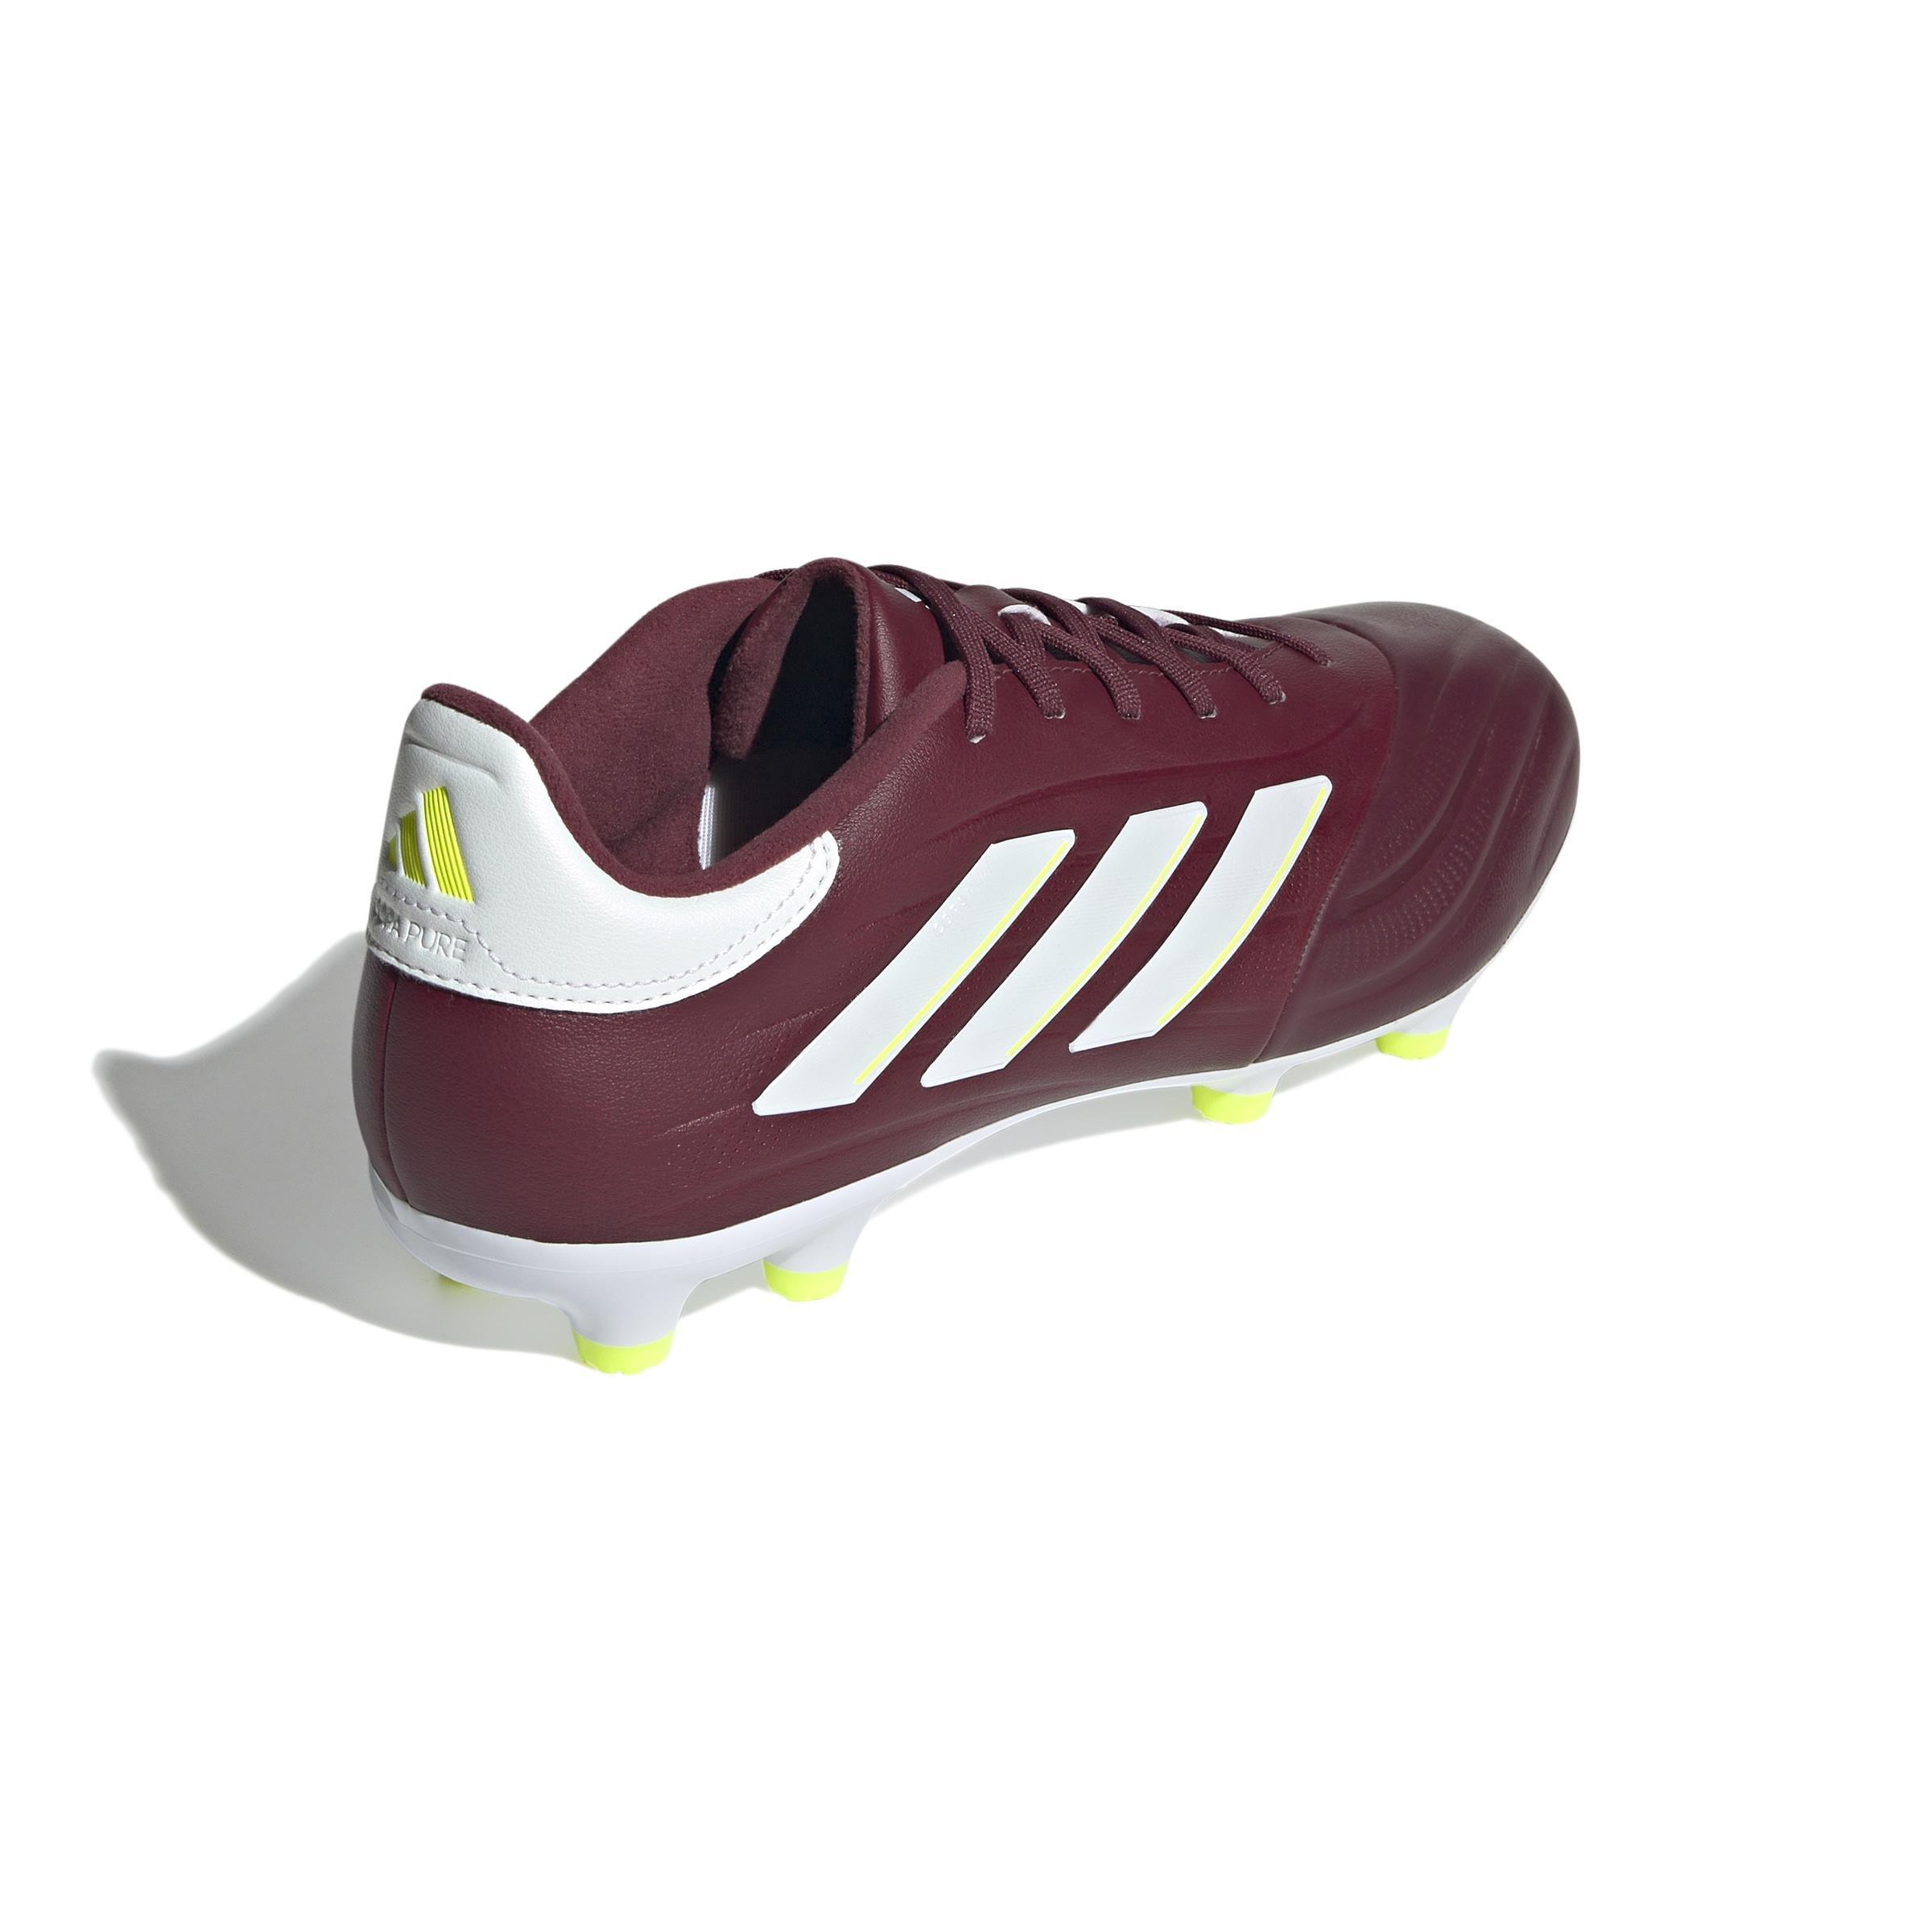 adidas - Unisex Copa Pure Ii League Firm Ground Boots, Burgundy